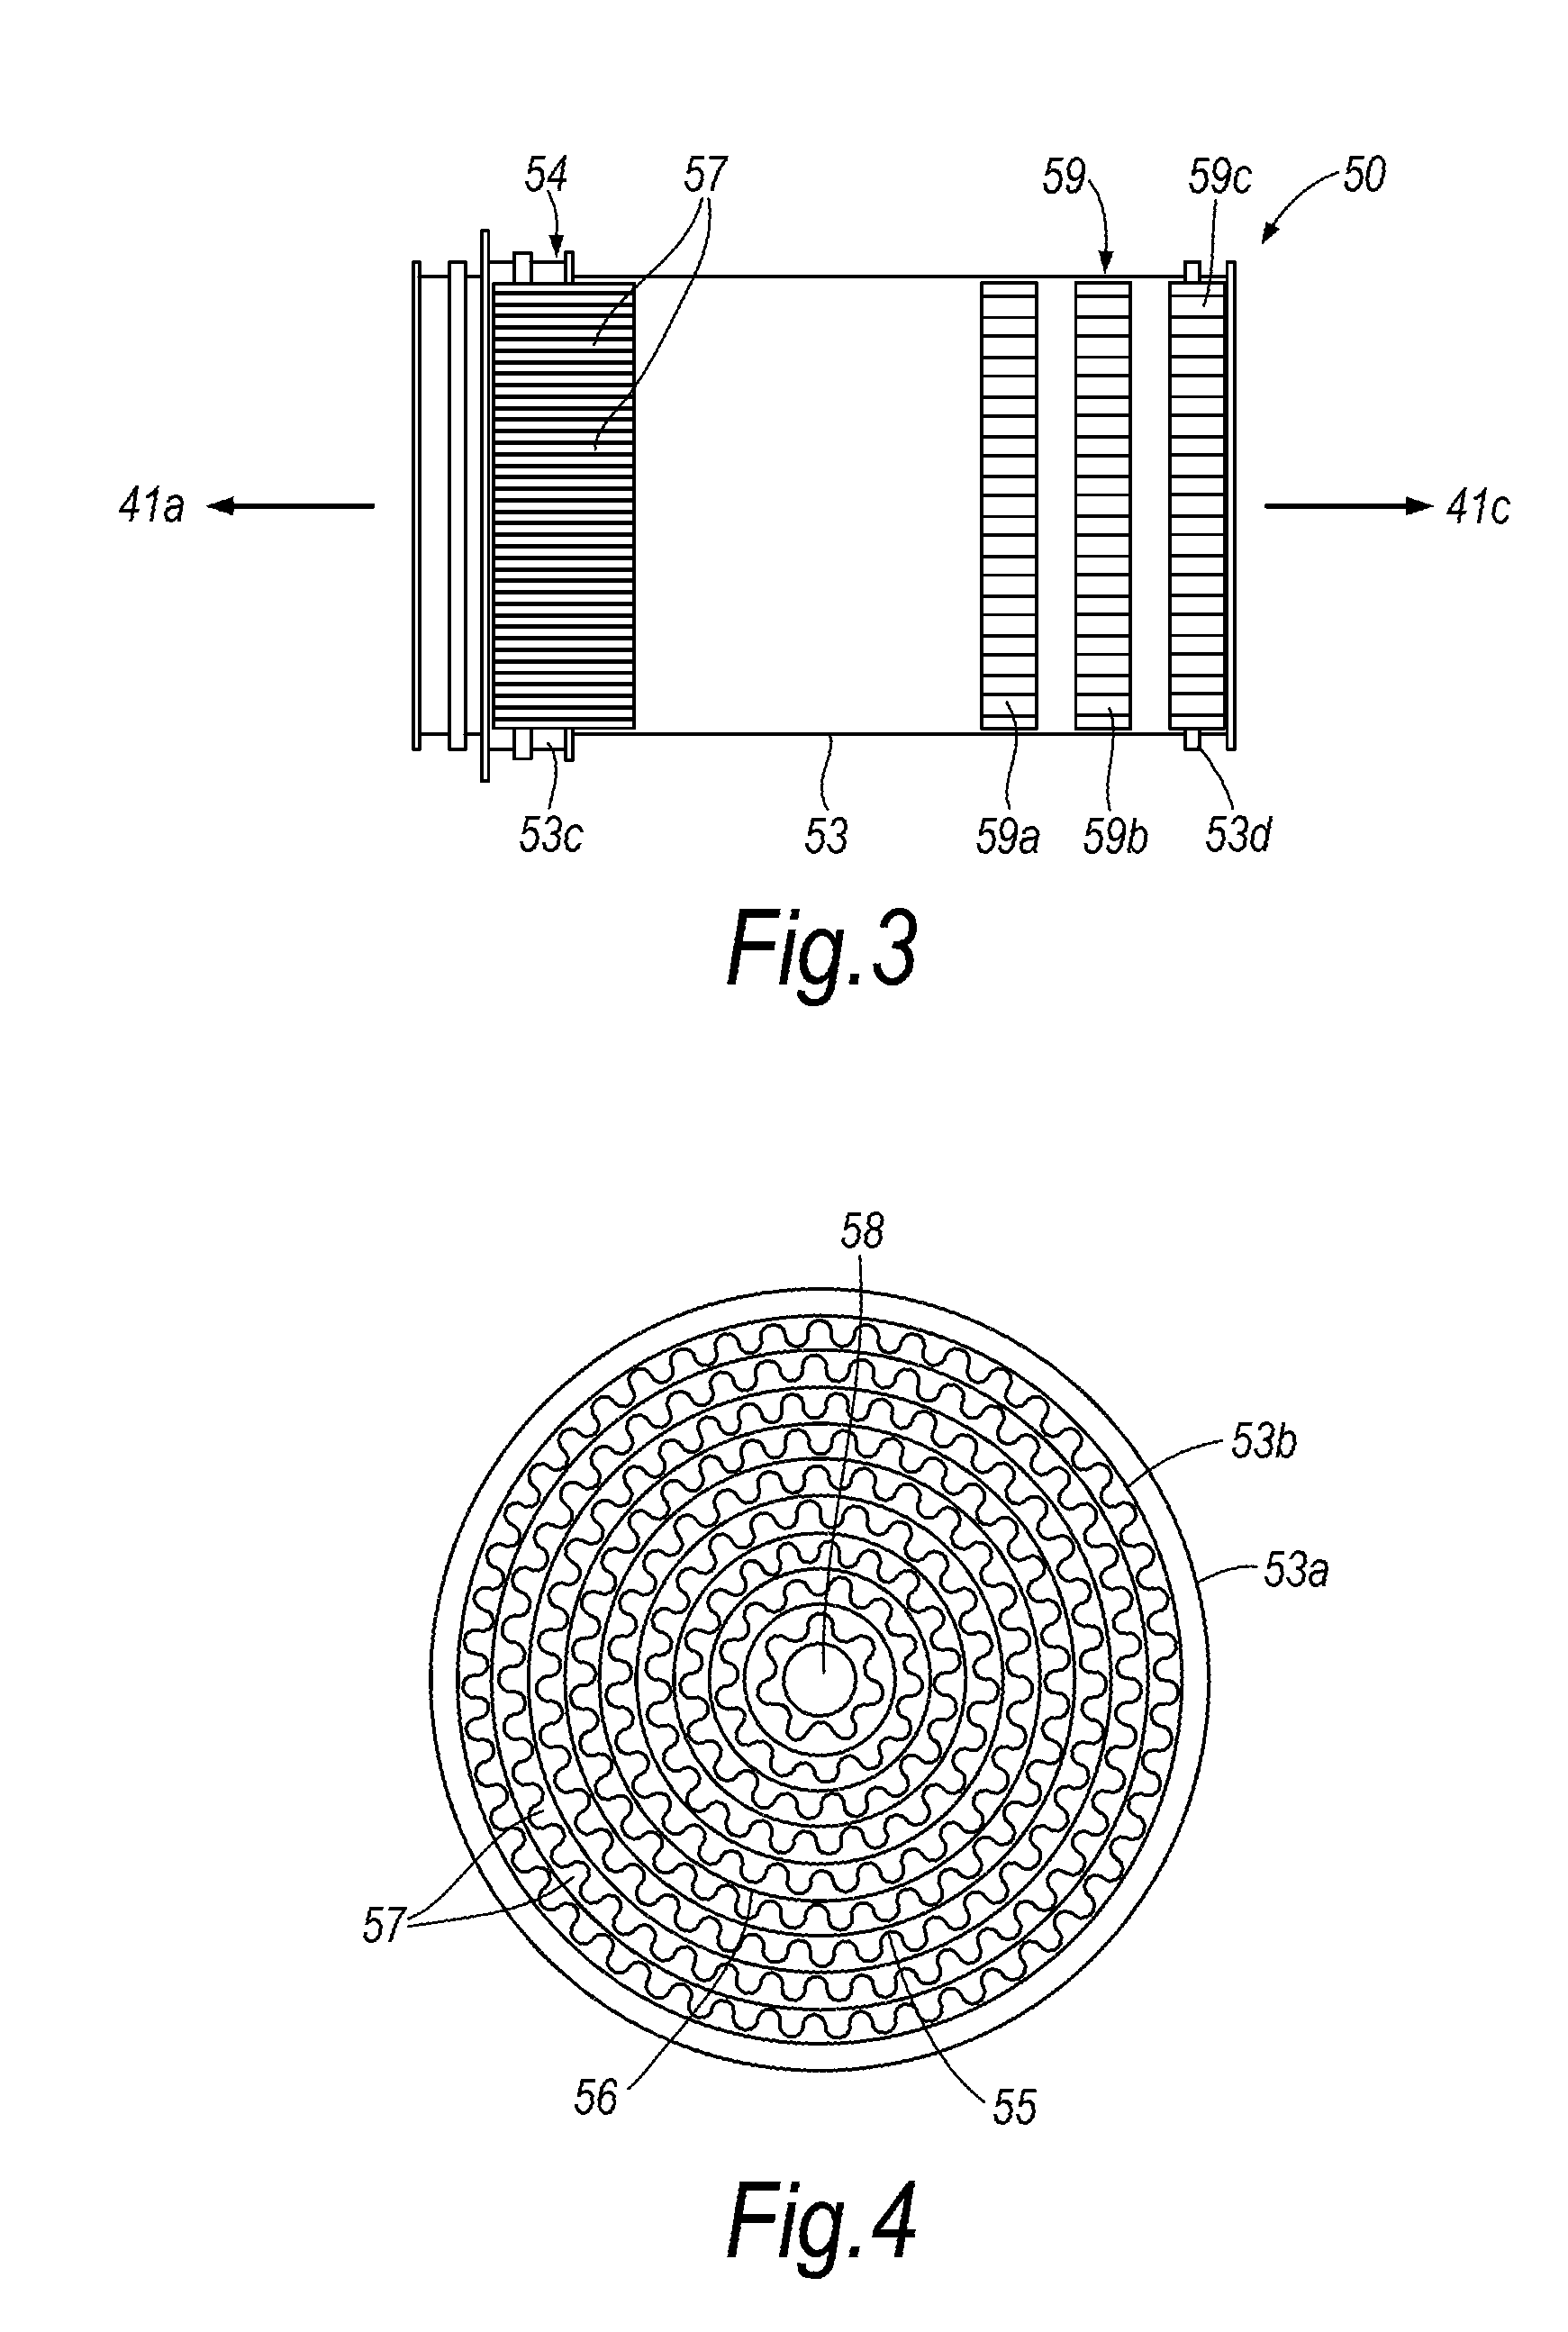 Flame trap cartridge, flame arrestor, method of preventing flame propagation into a fuel tank and method of operating an aircraft